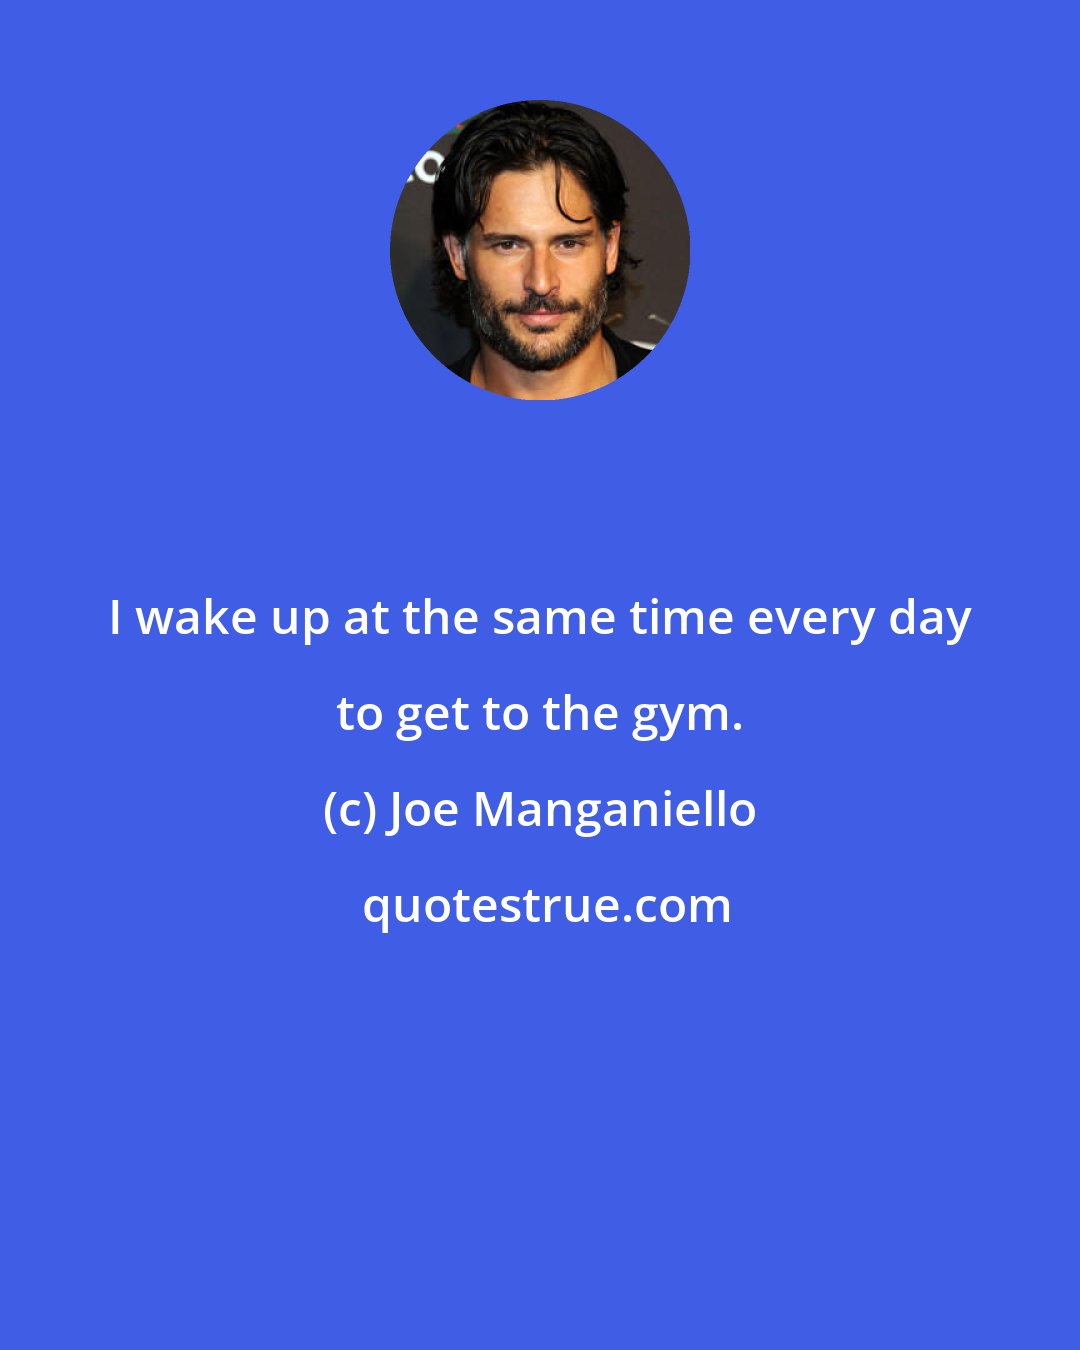 Joe Manganiello: I wake up at the same time every day to get to the gym.